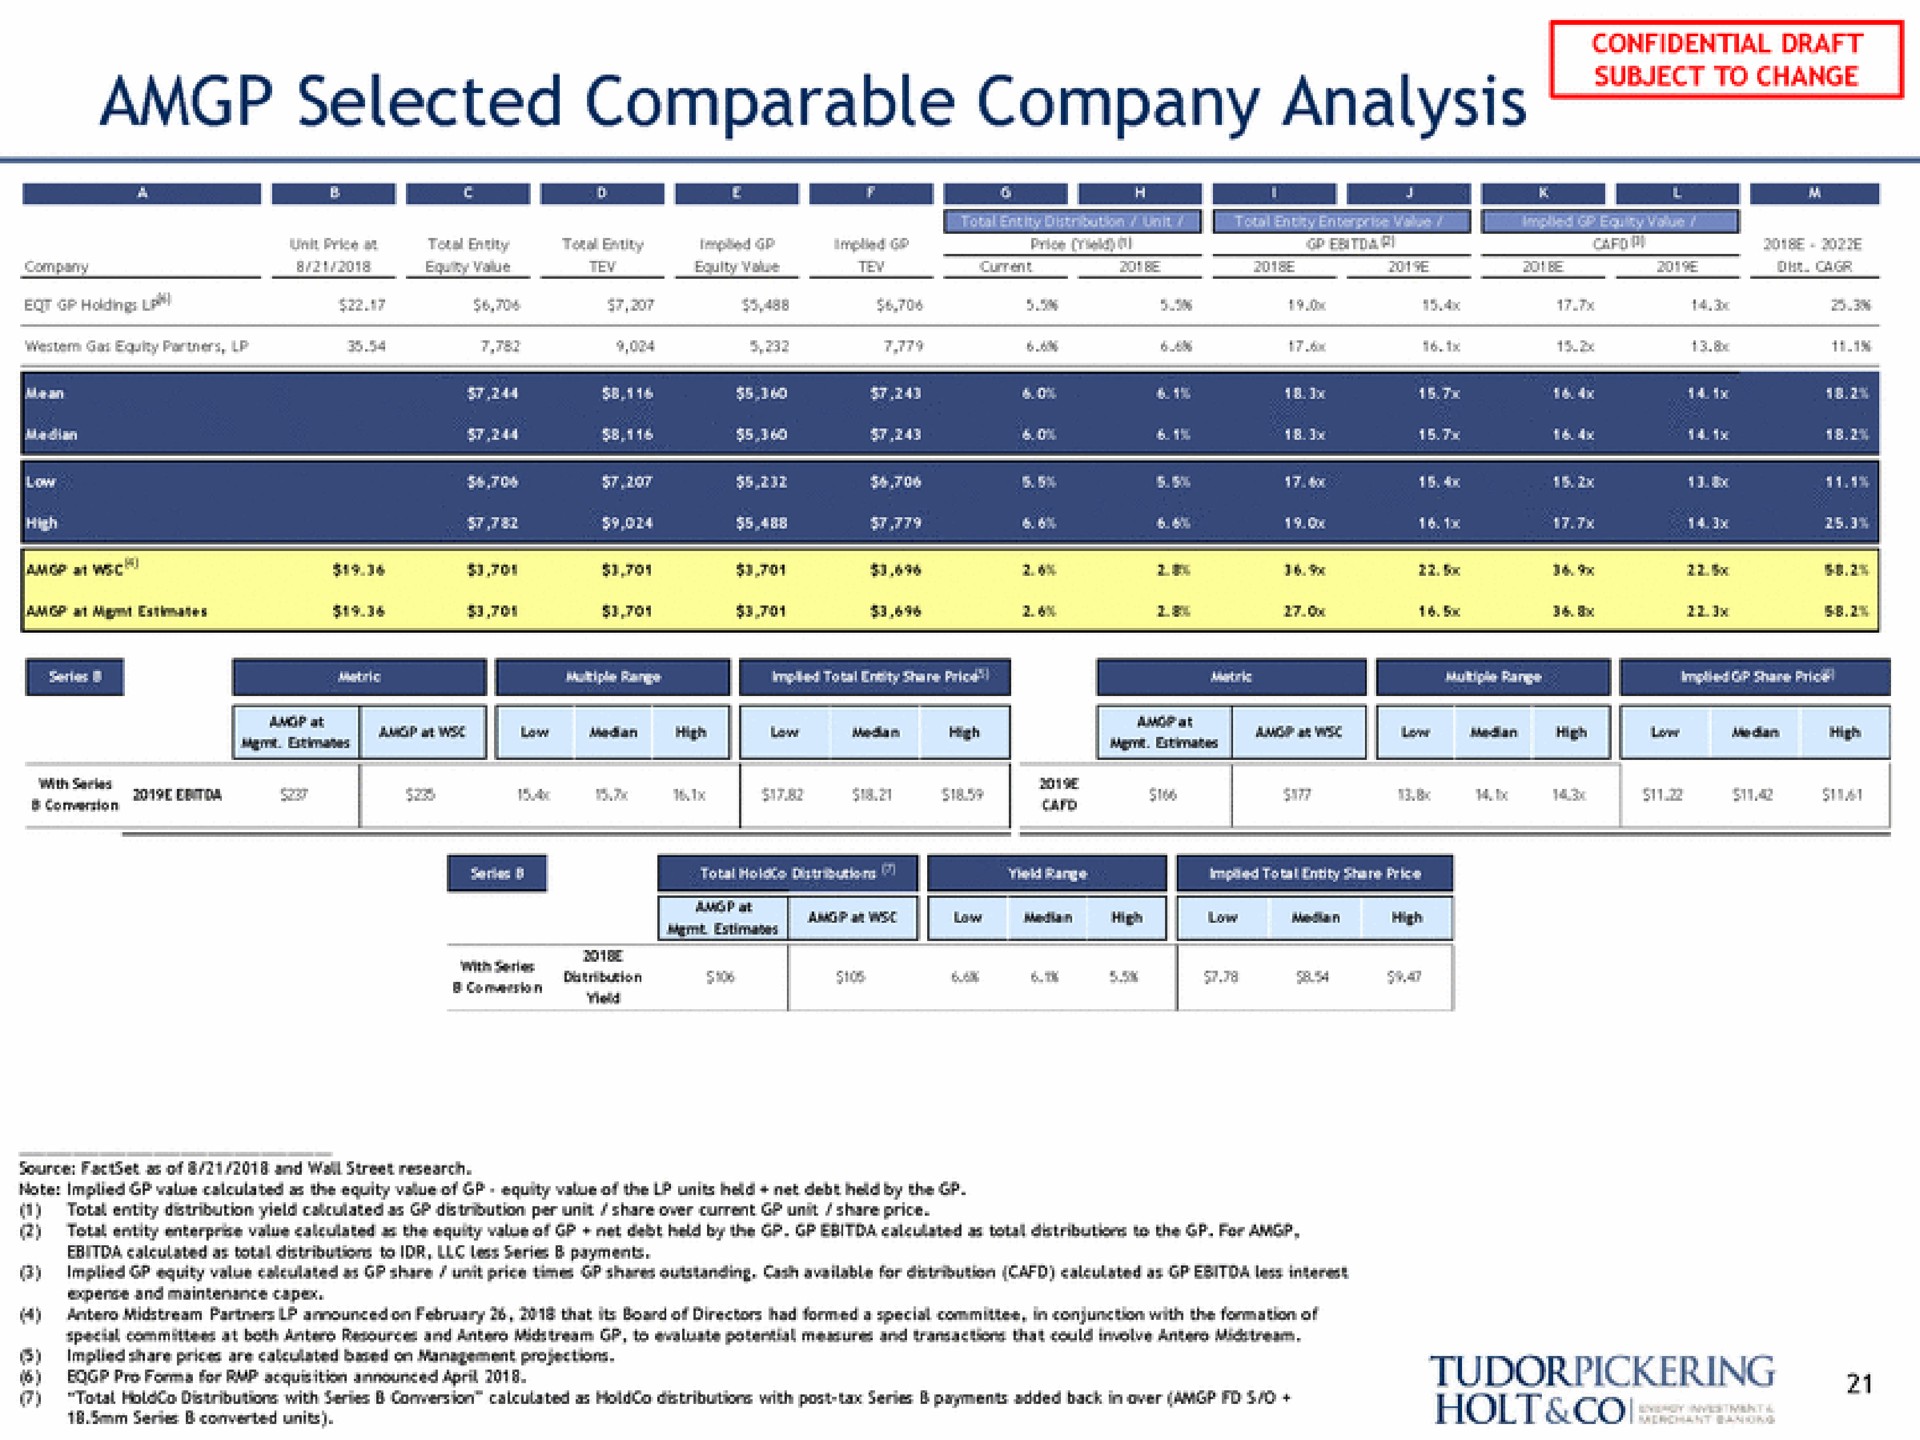 selected comparable company analysis | Tudor, Pickering, Holt & Co